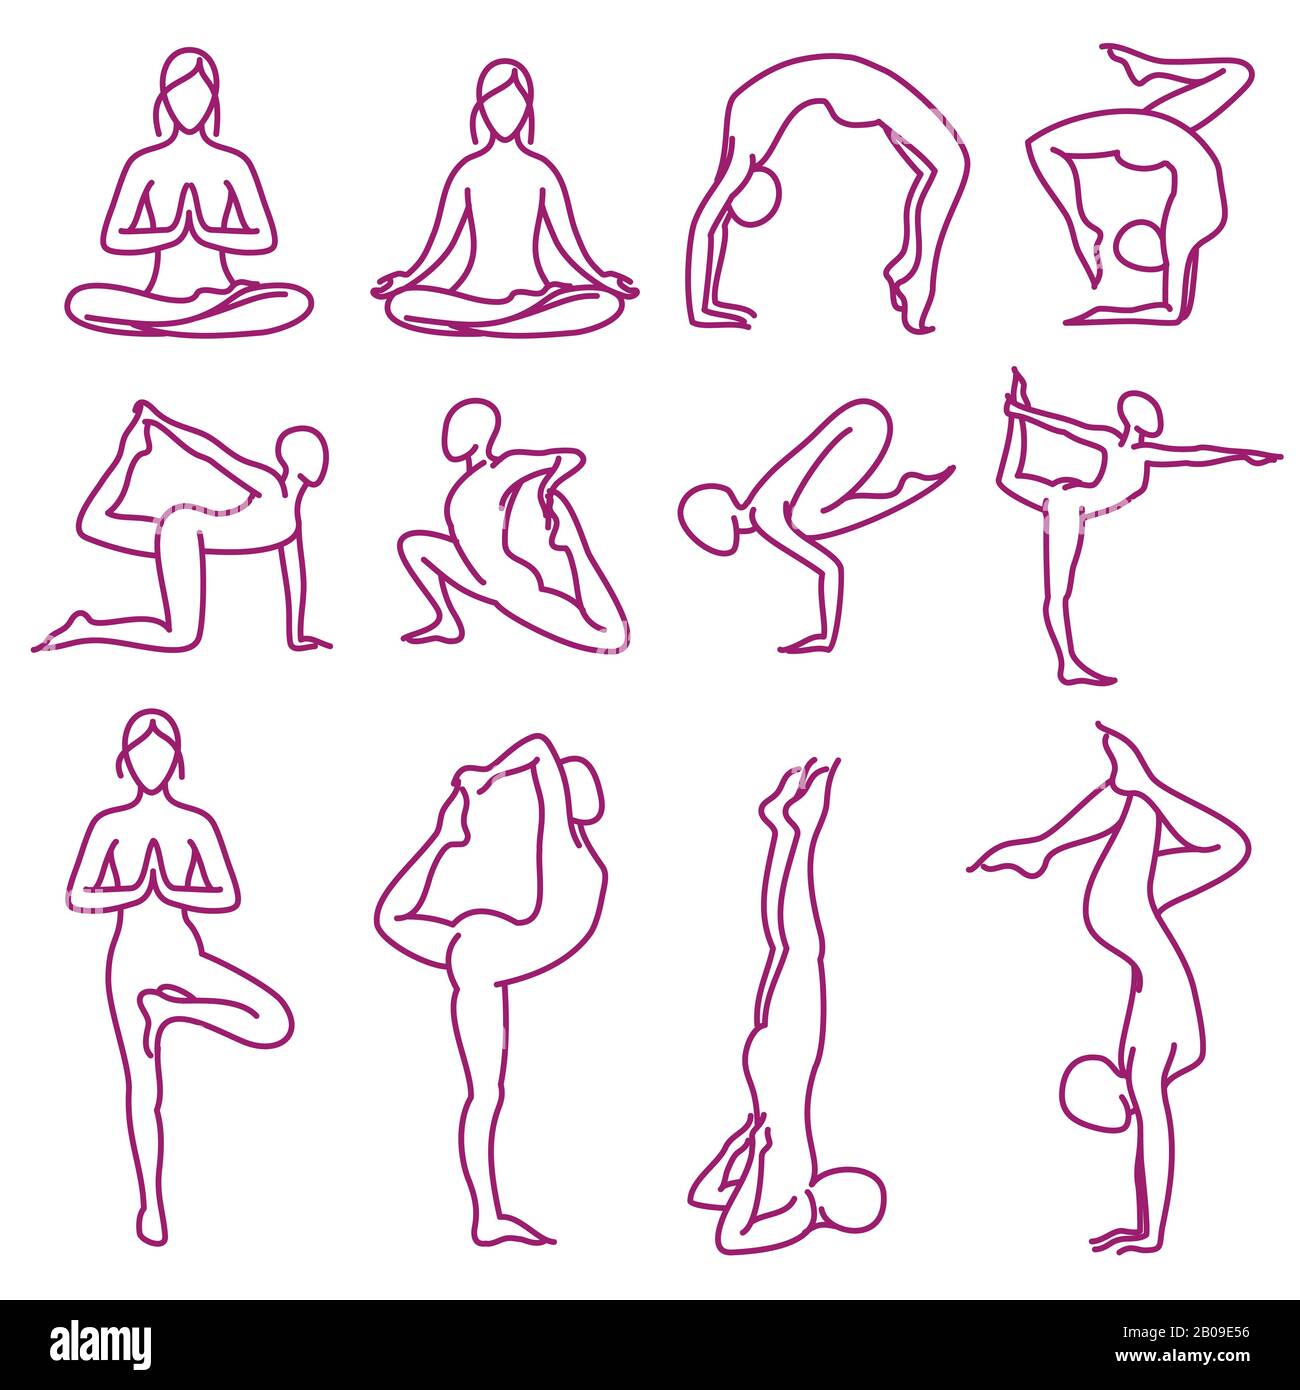 Yoga poses vector silhouettes, pilates fitness female exercises. Set of yoga poses, illustration of outline woman body in pose yoga Stock Vector